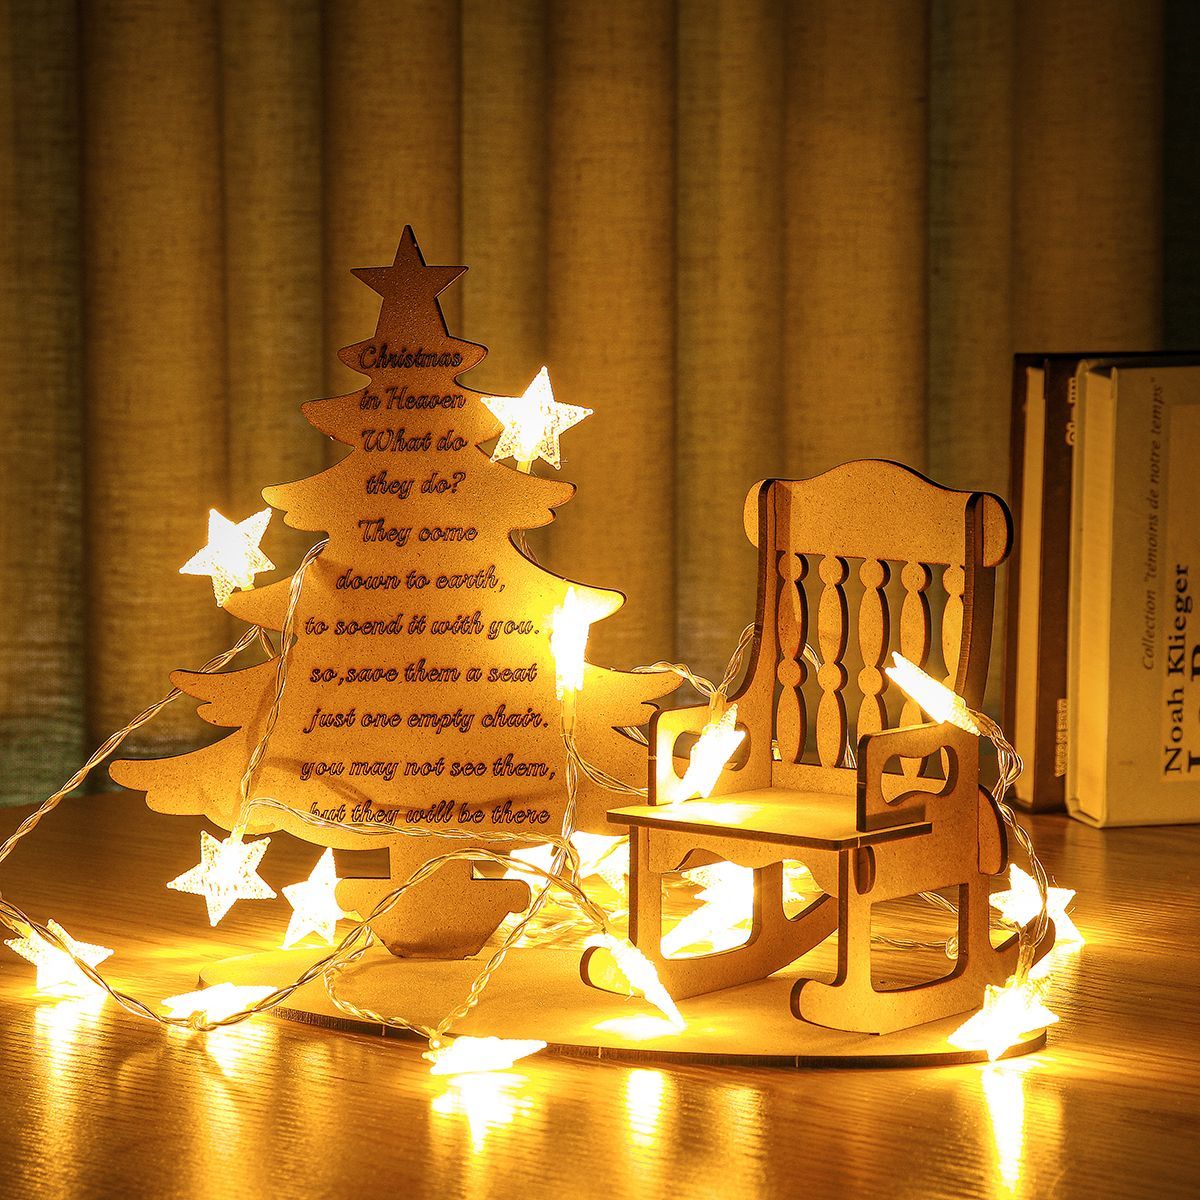 Christmas-In-Heaven-DIY-Wooden-Remembrance-Loved-One-Tree-Decorations-Craft-1605305